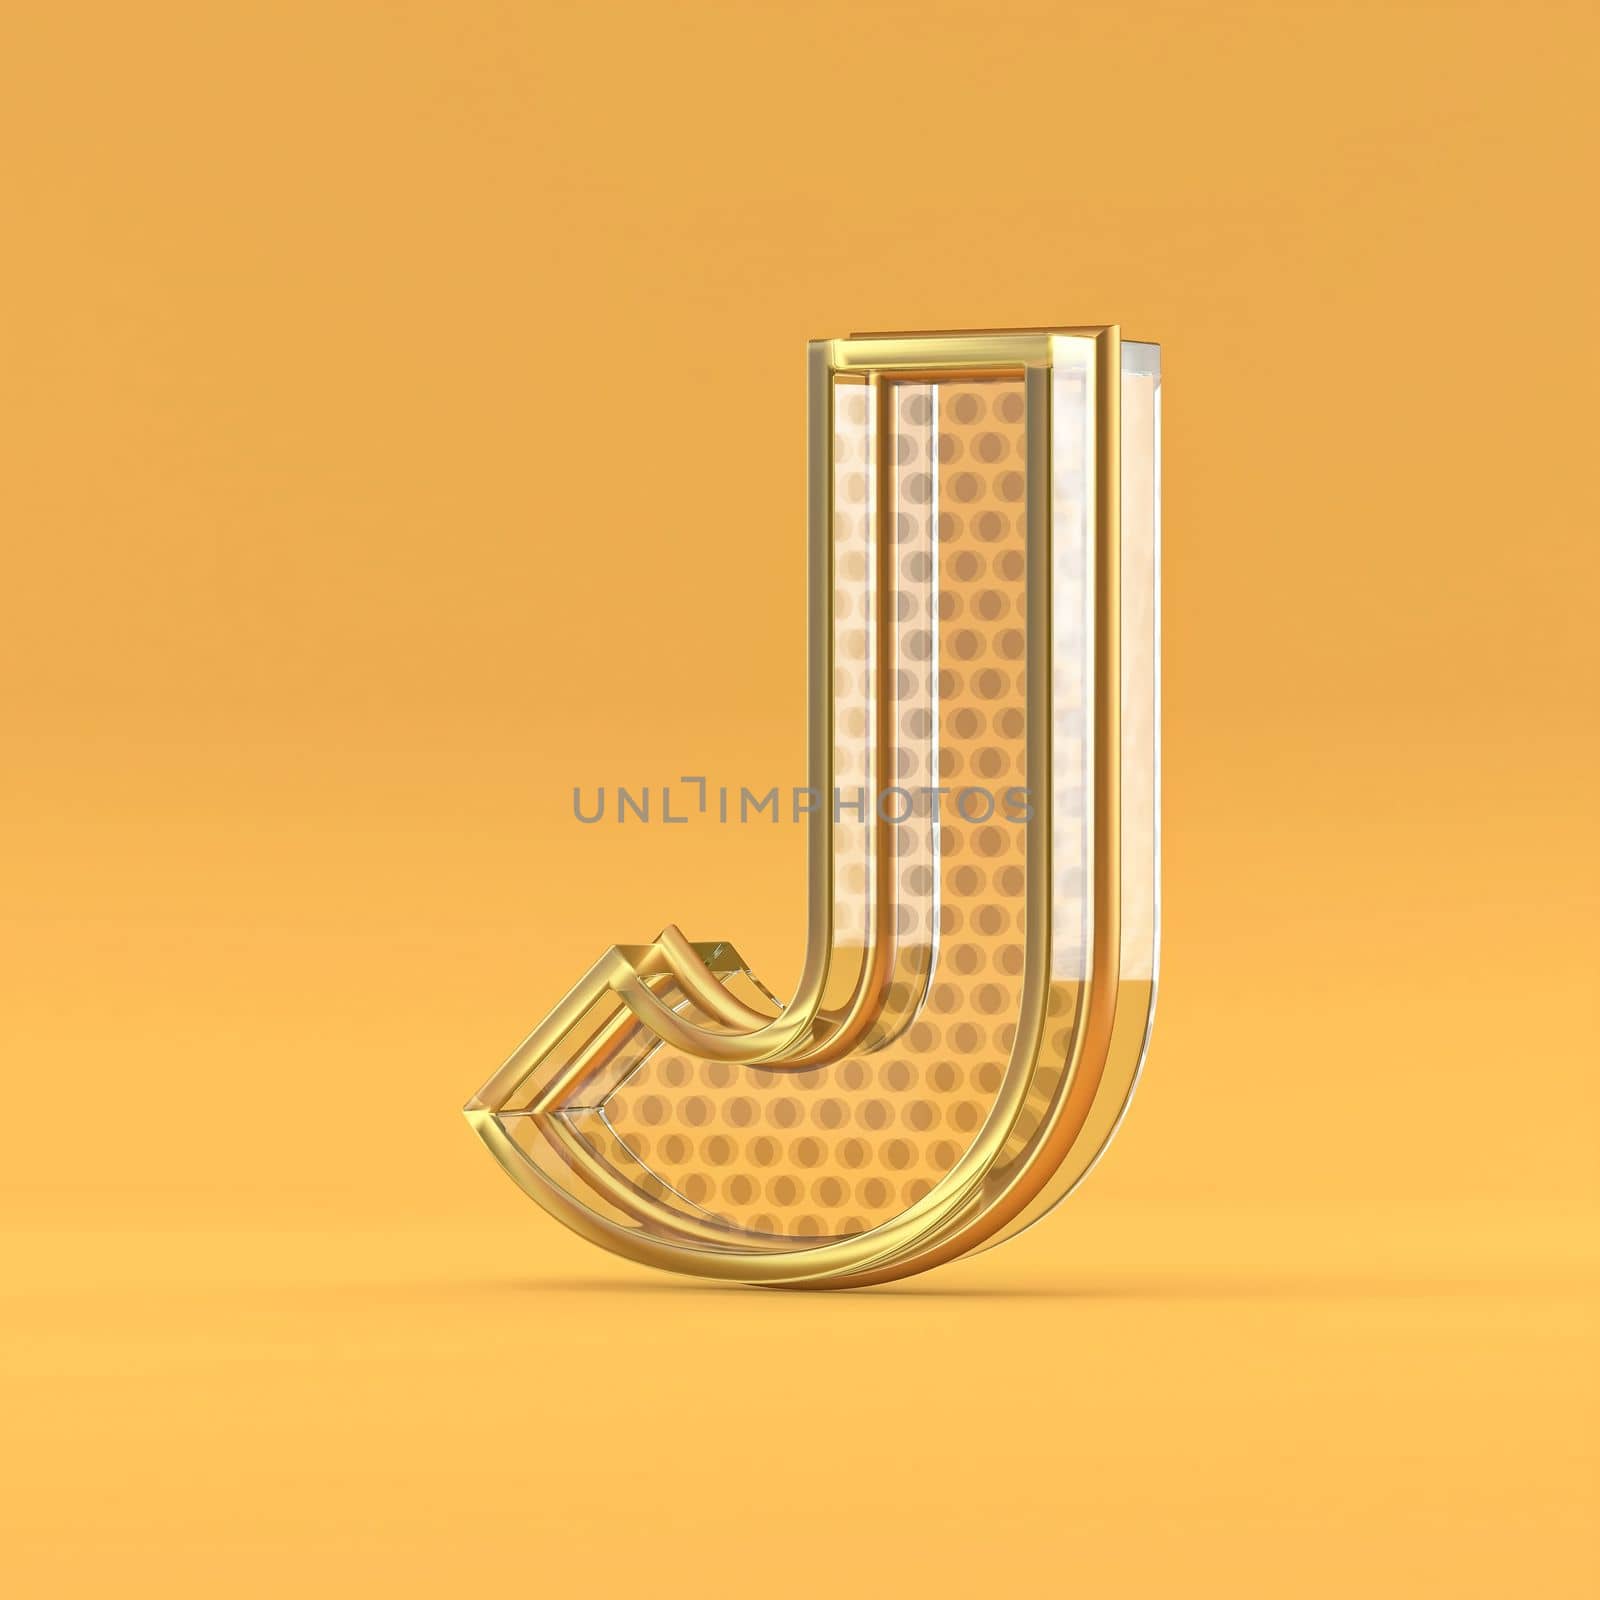 Gold wire and glass font letter J 3D rendering illustration isolated on orange background